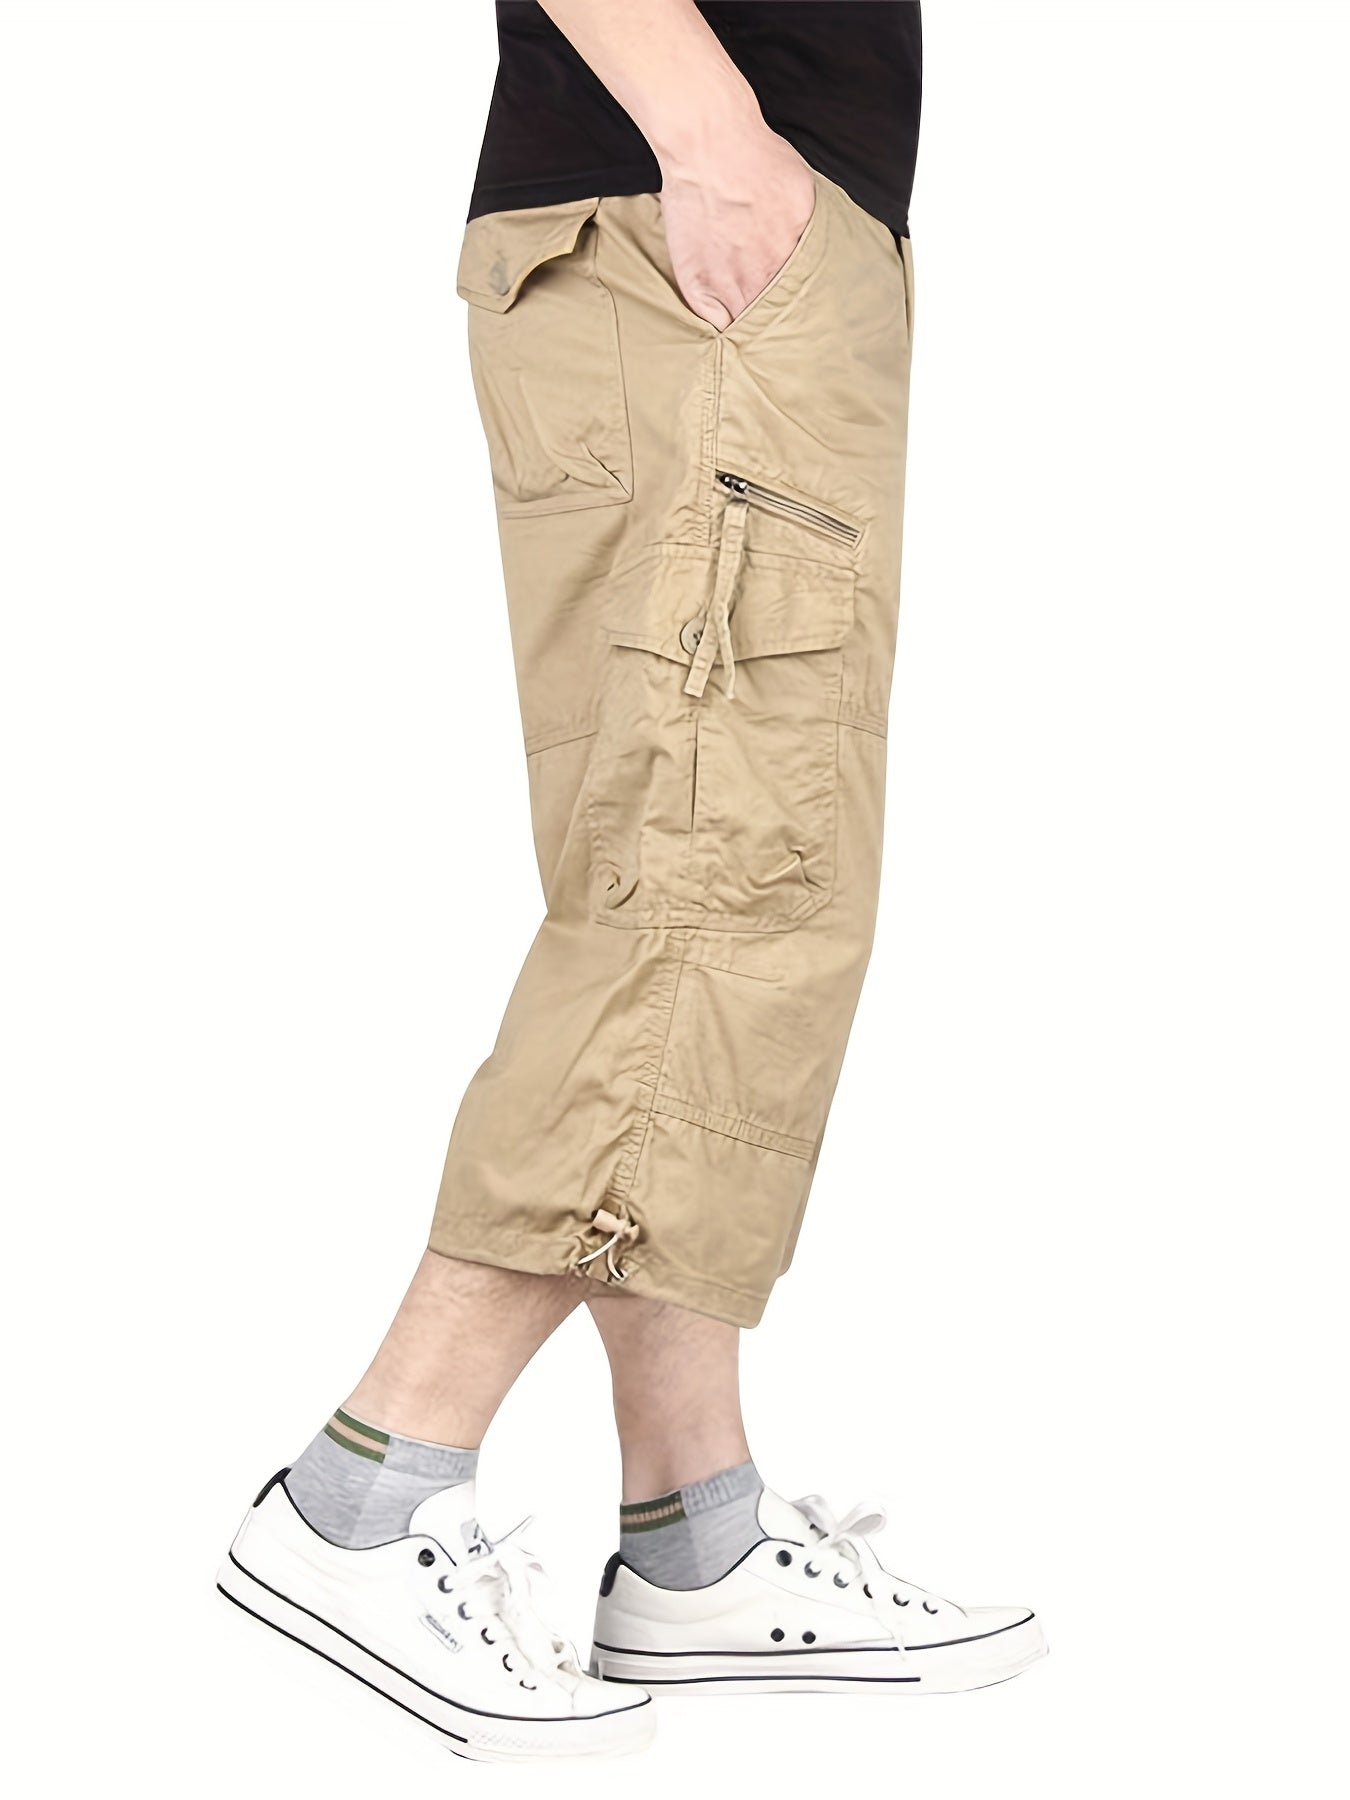 「binfenxie」Street Style Men's Casual Cargo Capris Jeans With Pocket, Men's Outfits